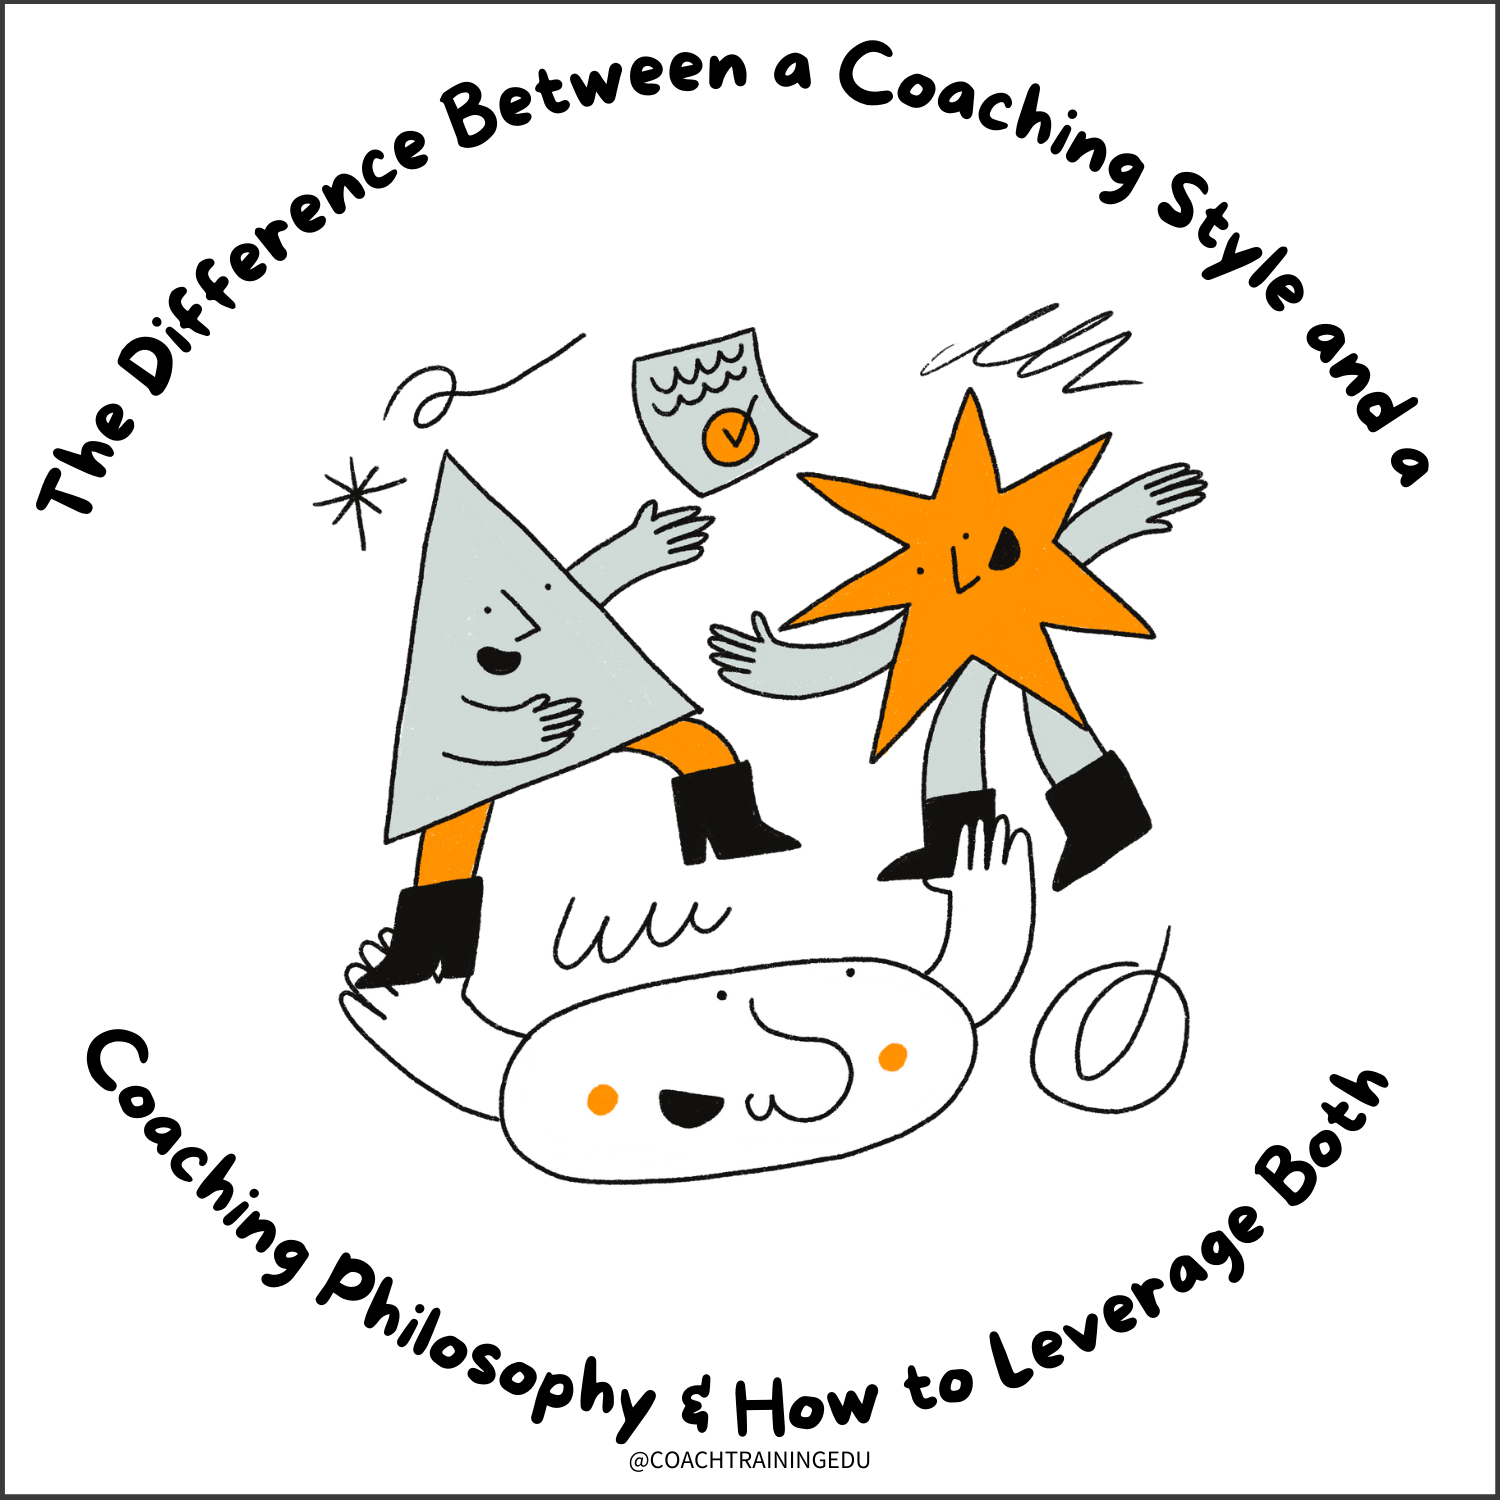 The Difference Between a Coaching Style and a Coaching Philosophy & How to Leverage Both